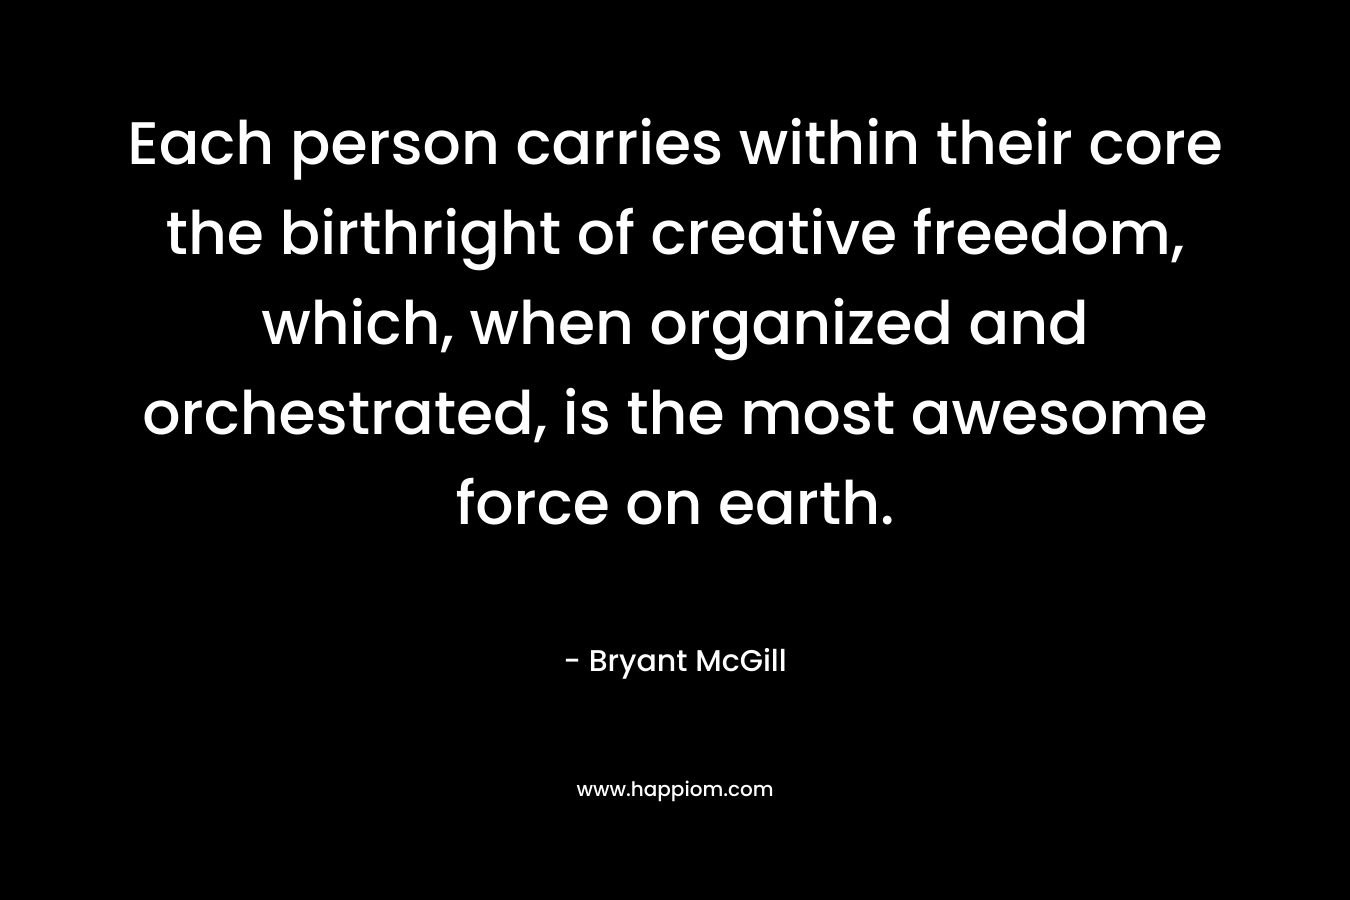 Each person carries within their core the birthright of creative freedom, which, when organized and orchestrated, is the most awesome force on earth.